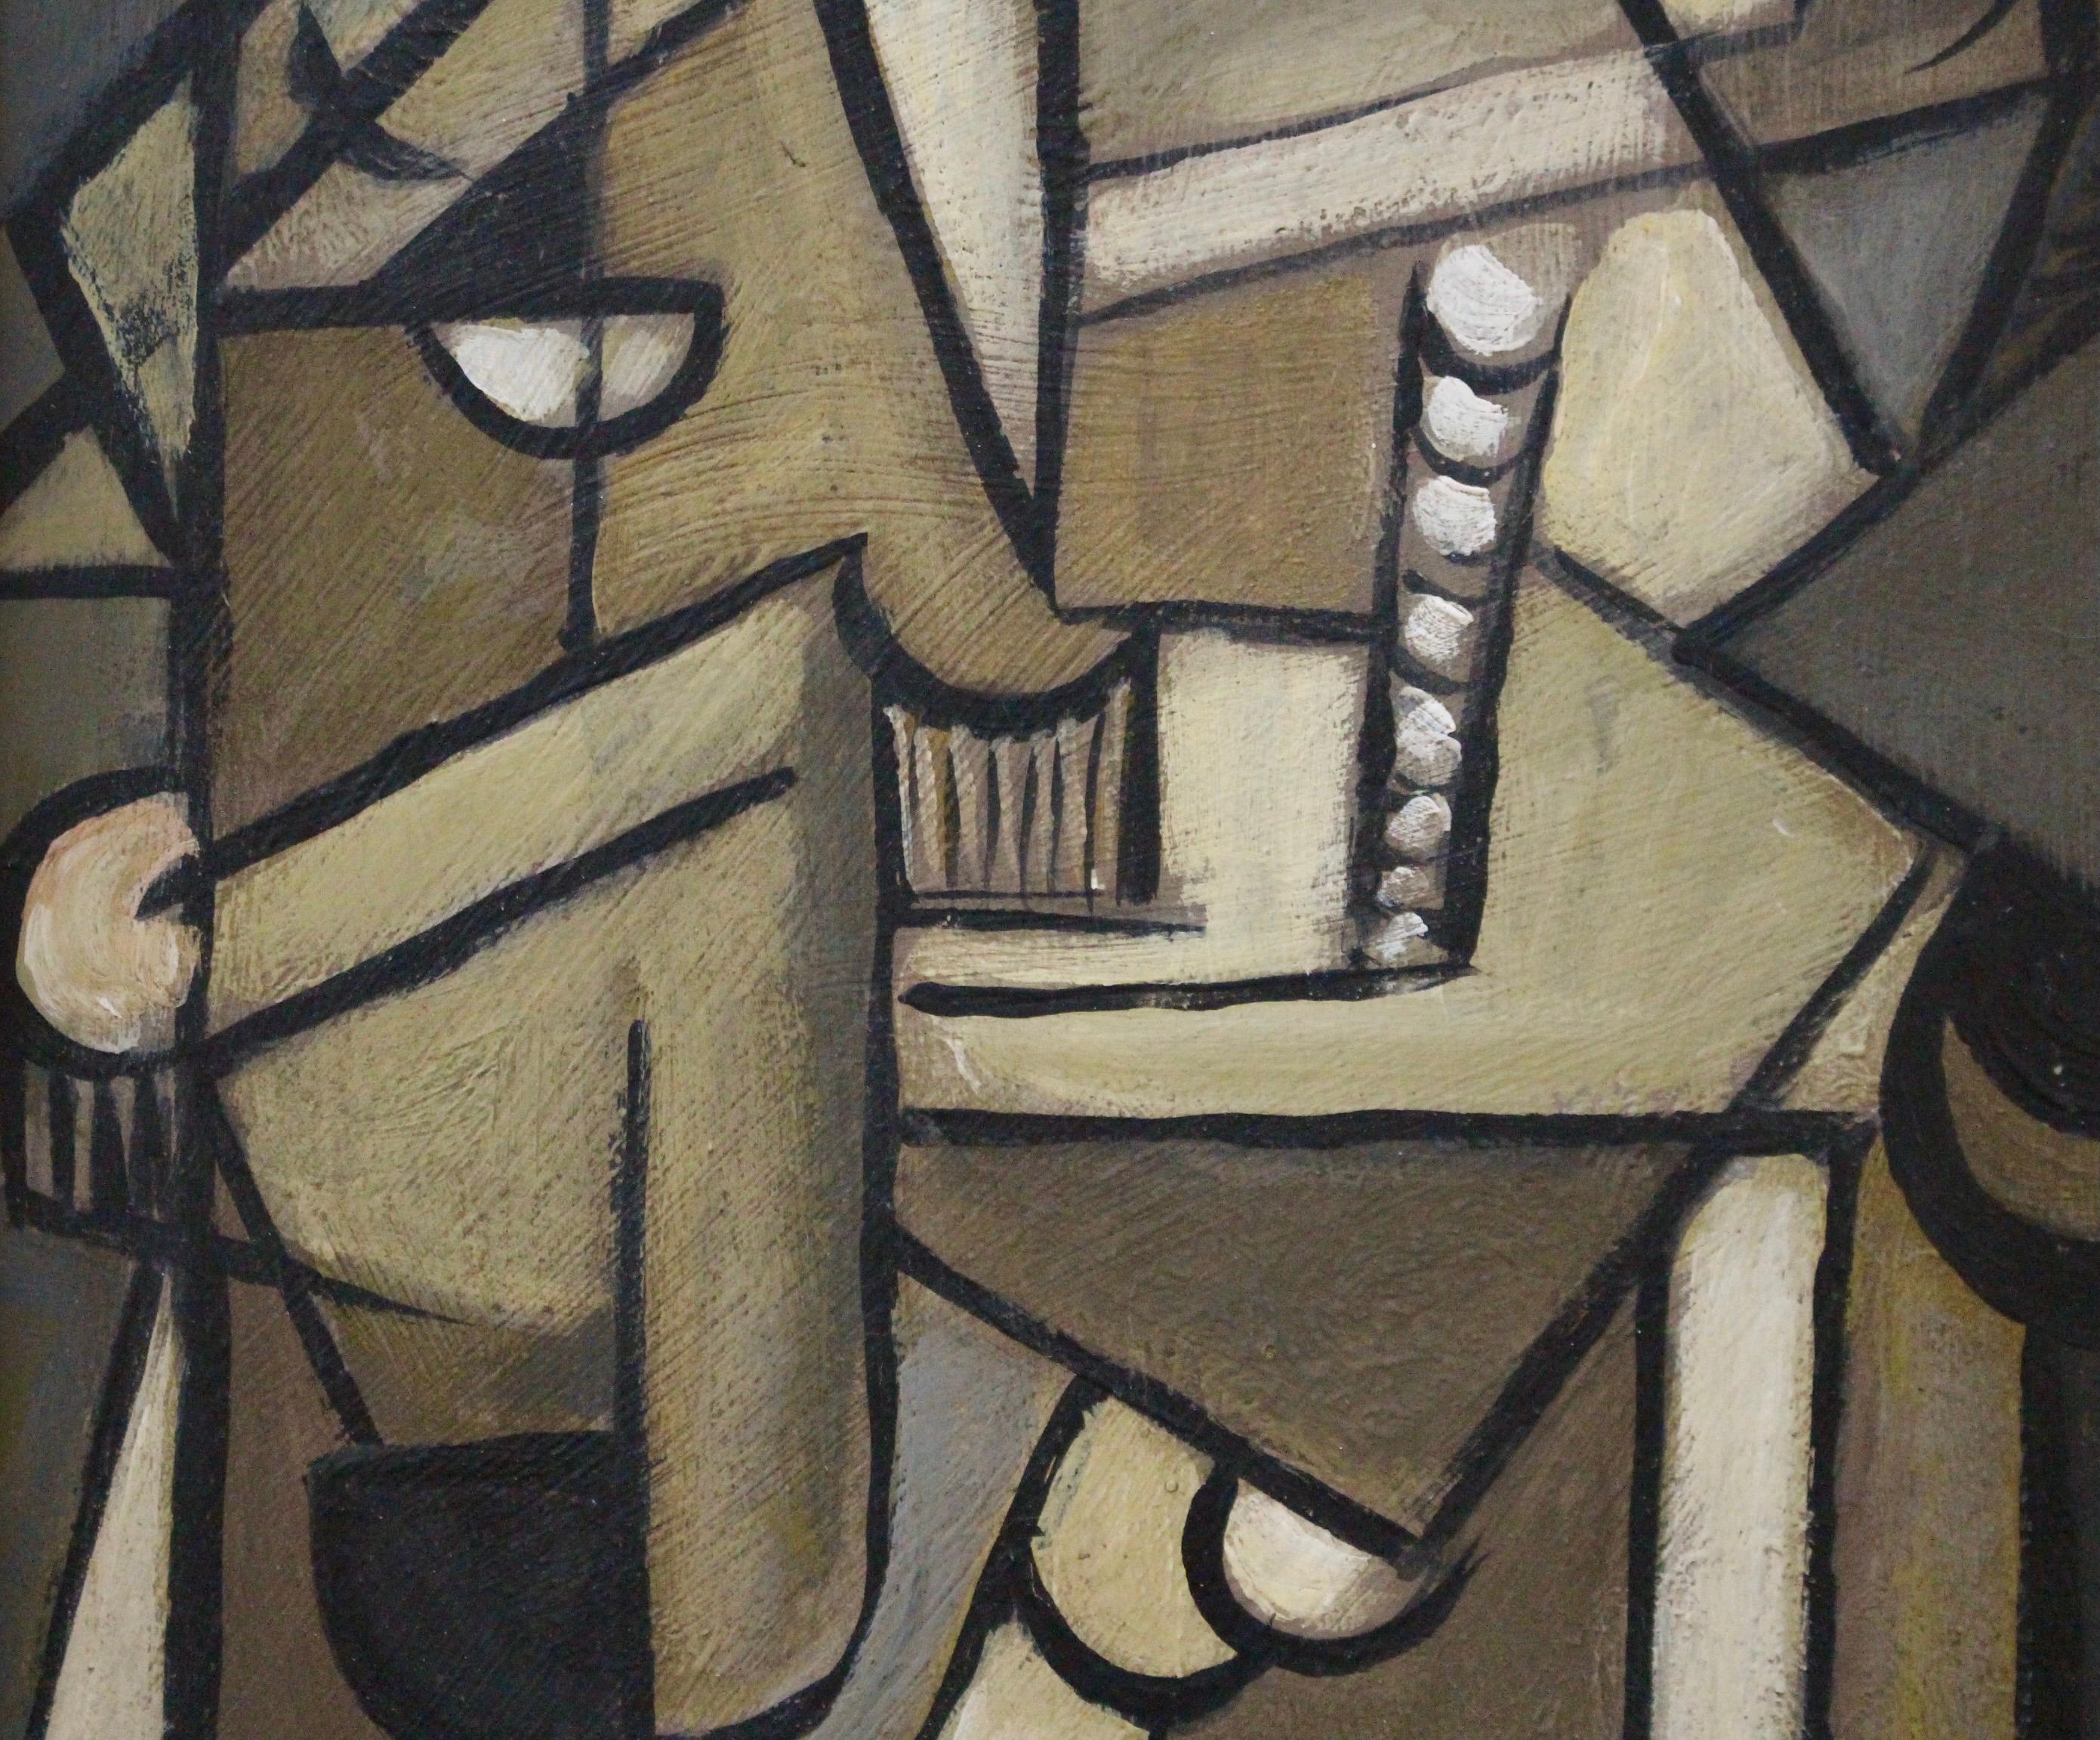 'Arrangement in Cubism, oil on board (circa 1960s-70s), Berlin school. Dark lines frame almost monochromatic geometric shapes. These very subtle hues combine to create a balanced cubist arrangement in portrait format. In good overall condition